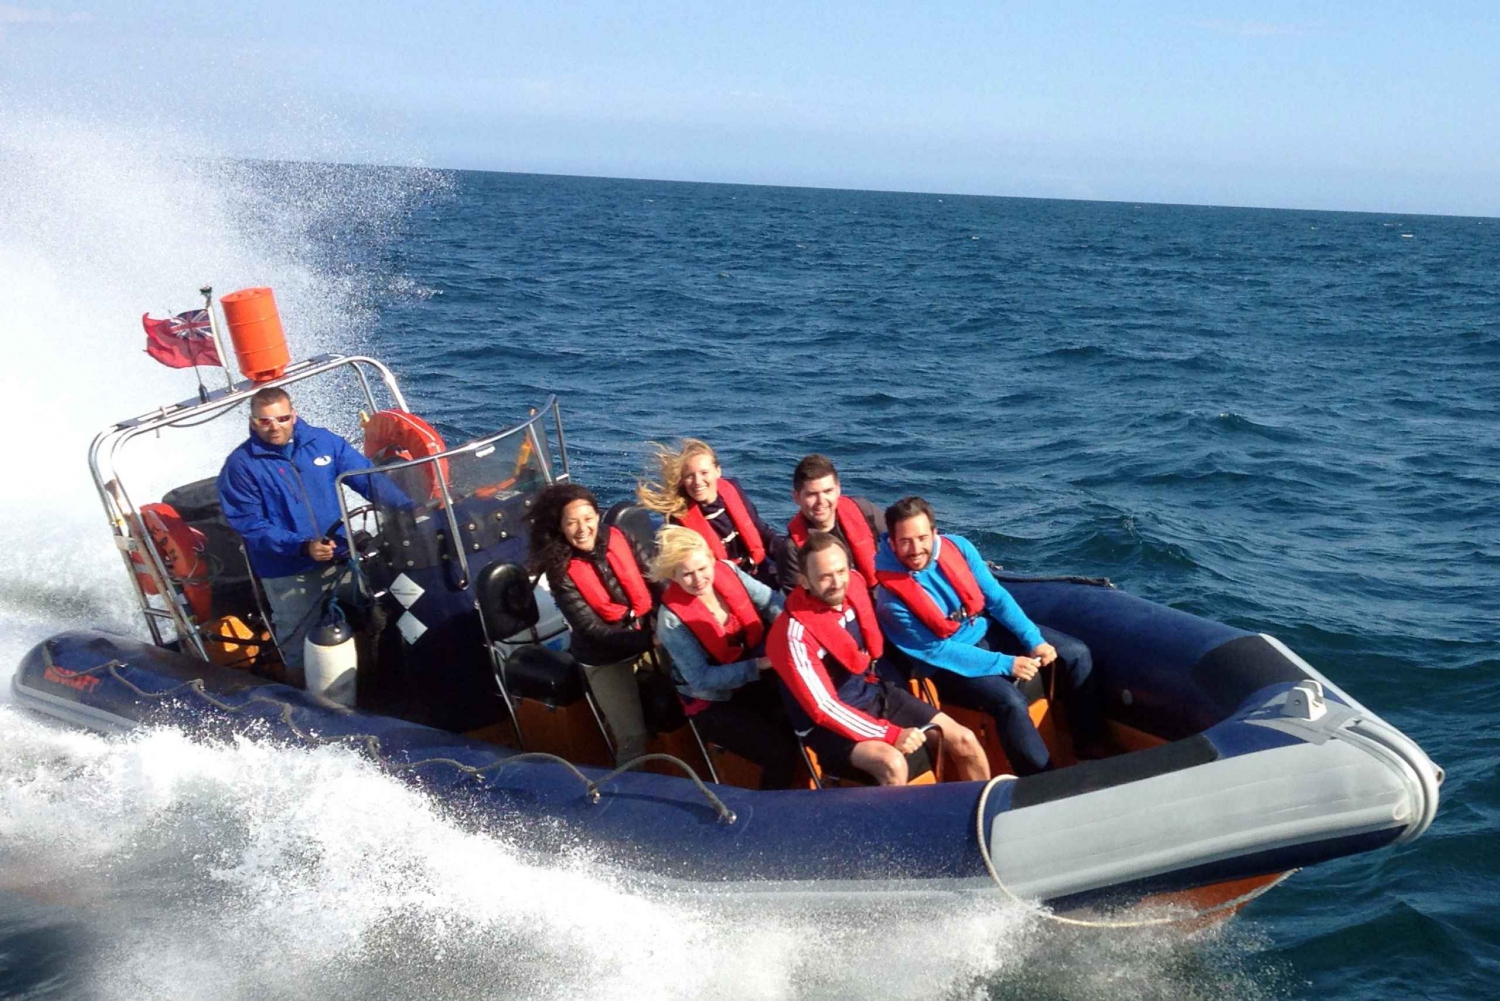 Barcelona: High Speed Powerboat Ride and Sightseeing Tour